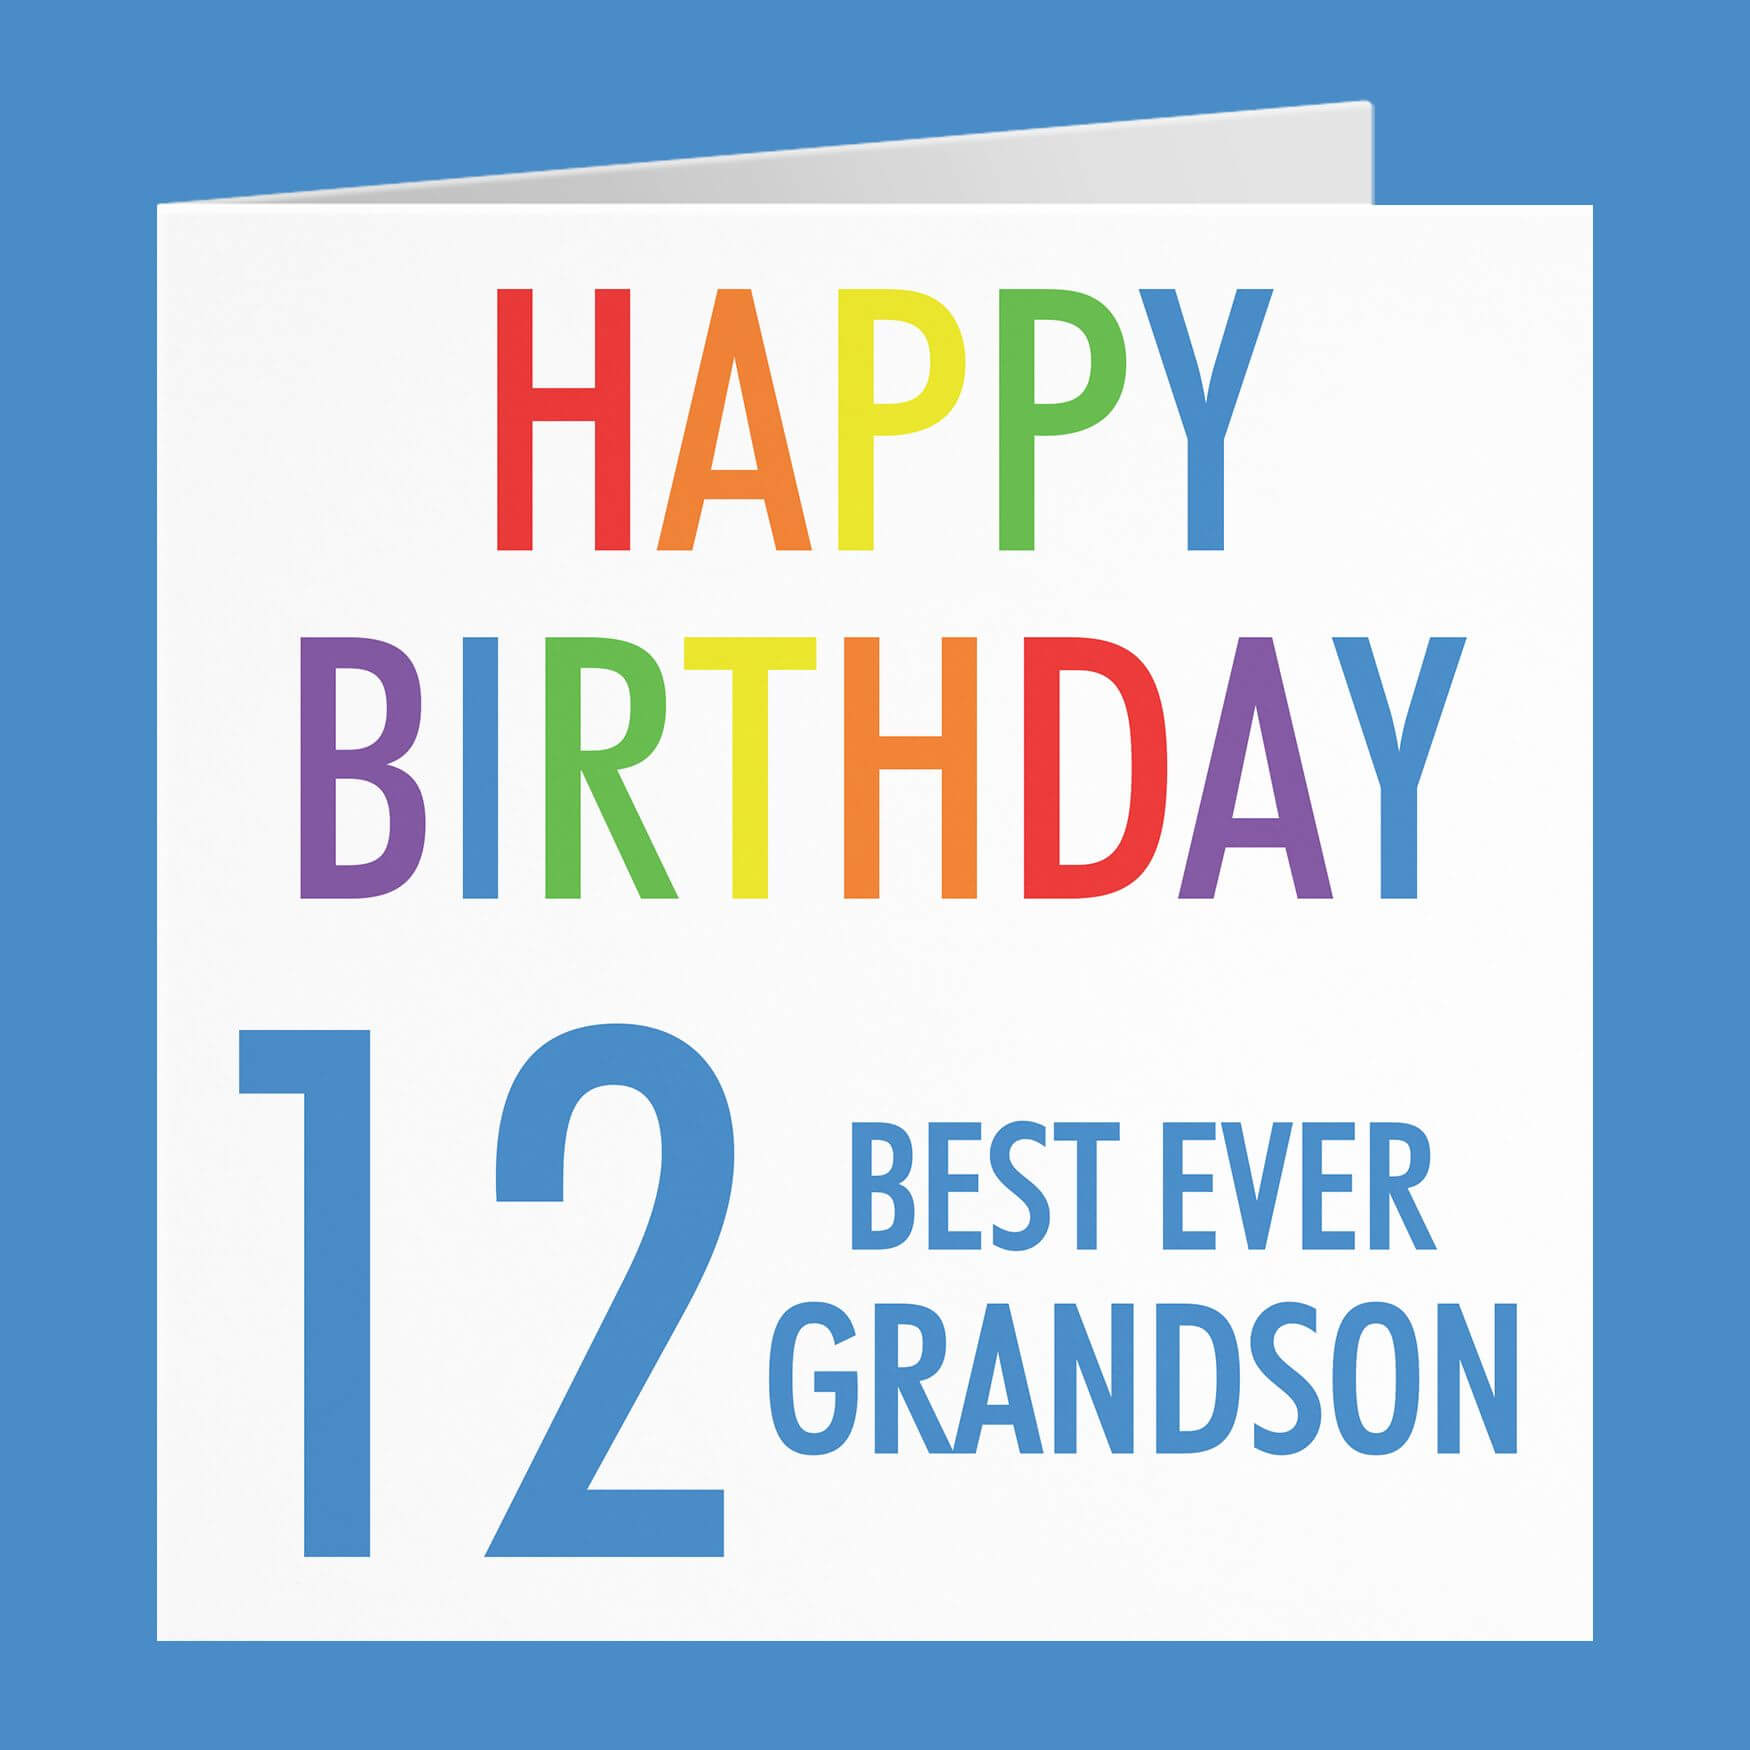 11-happy-12th-birthday-grandson-wishes-90lovehome